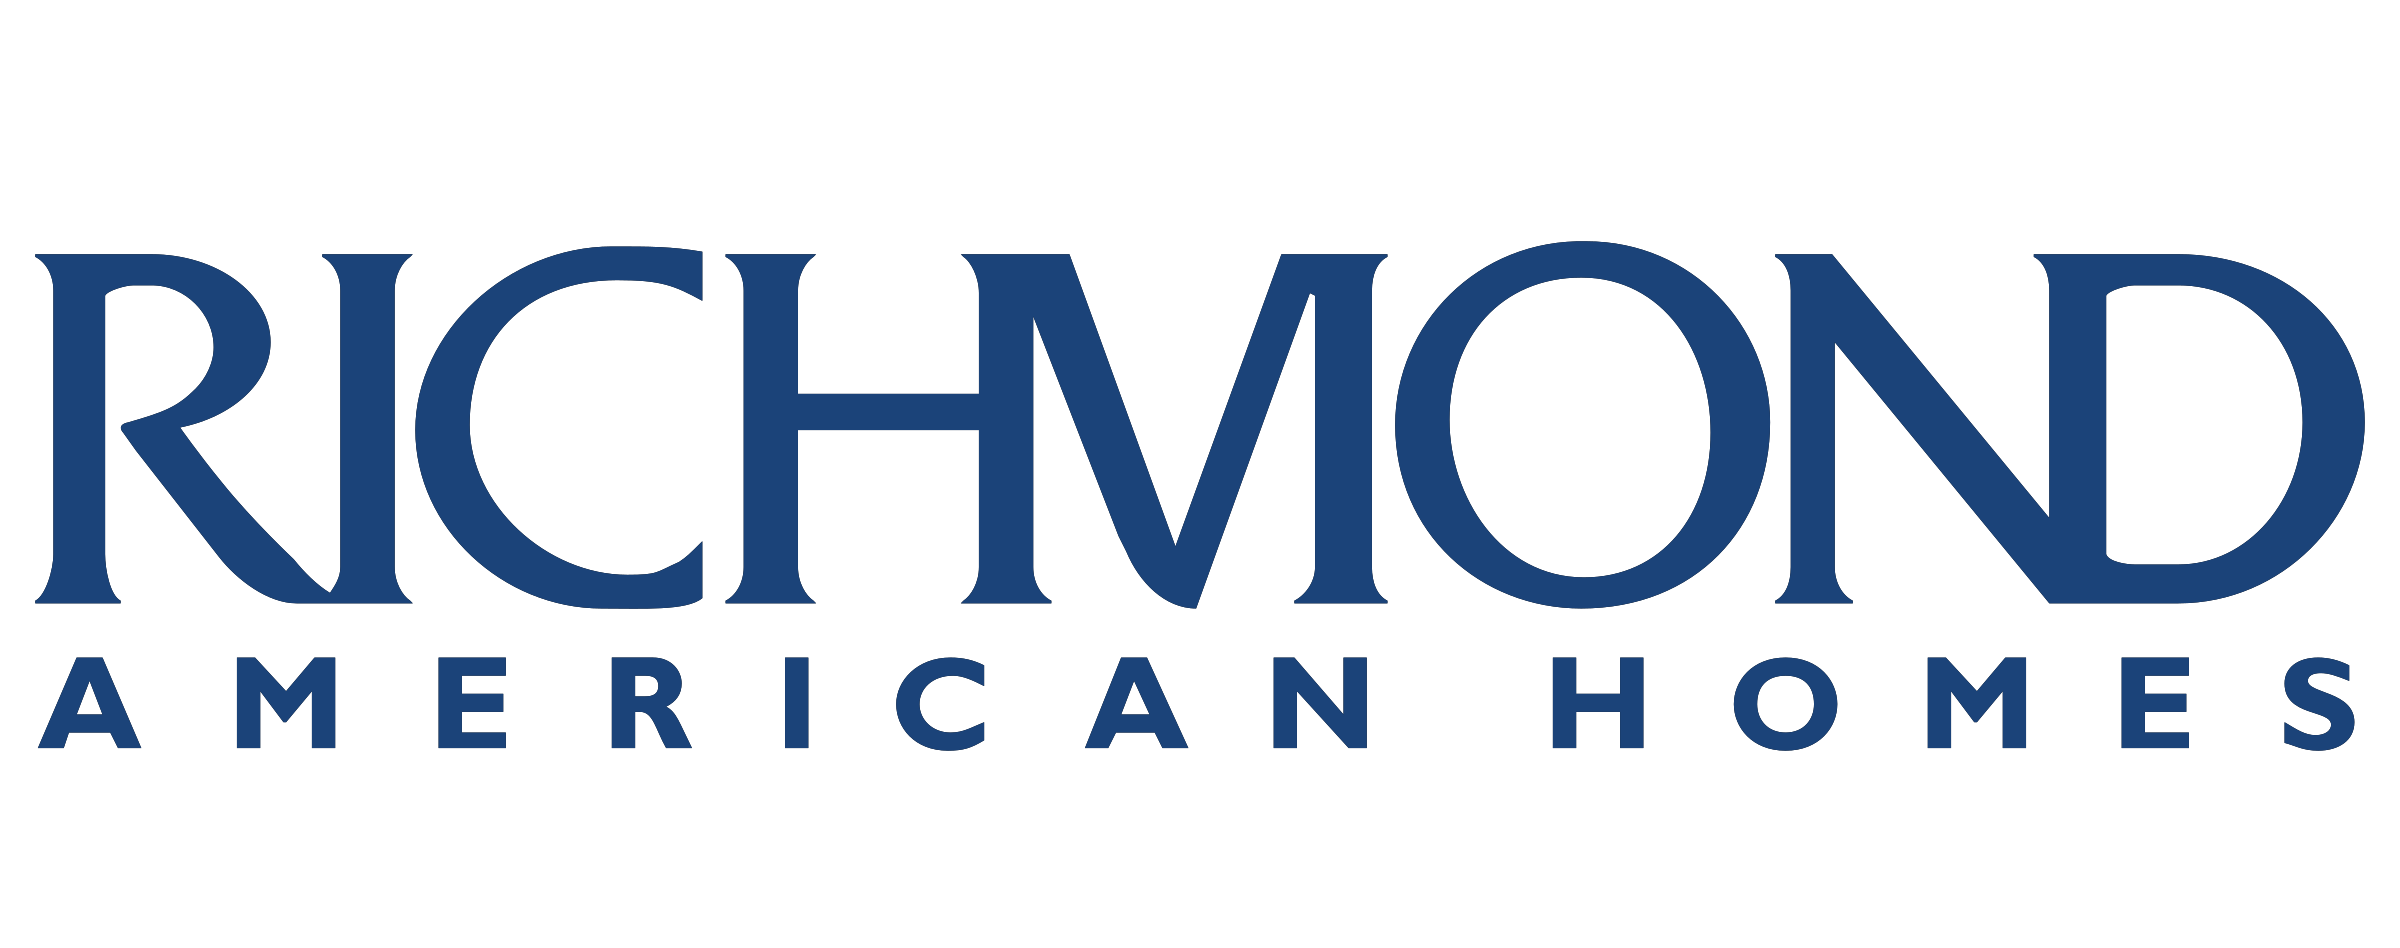 Richmond American Homes Logo in a navy blue color